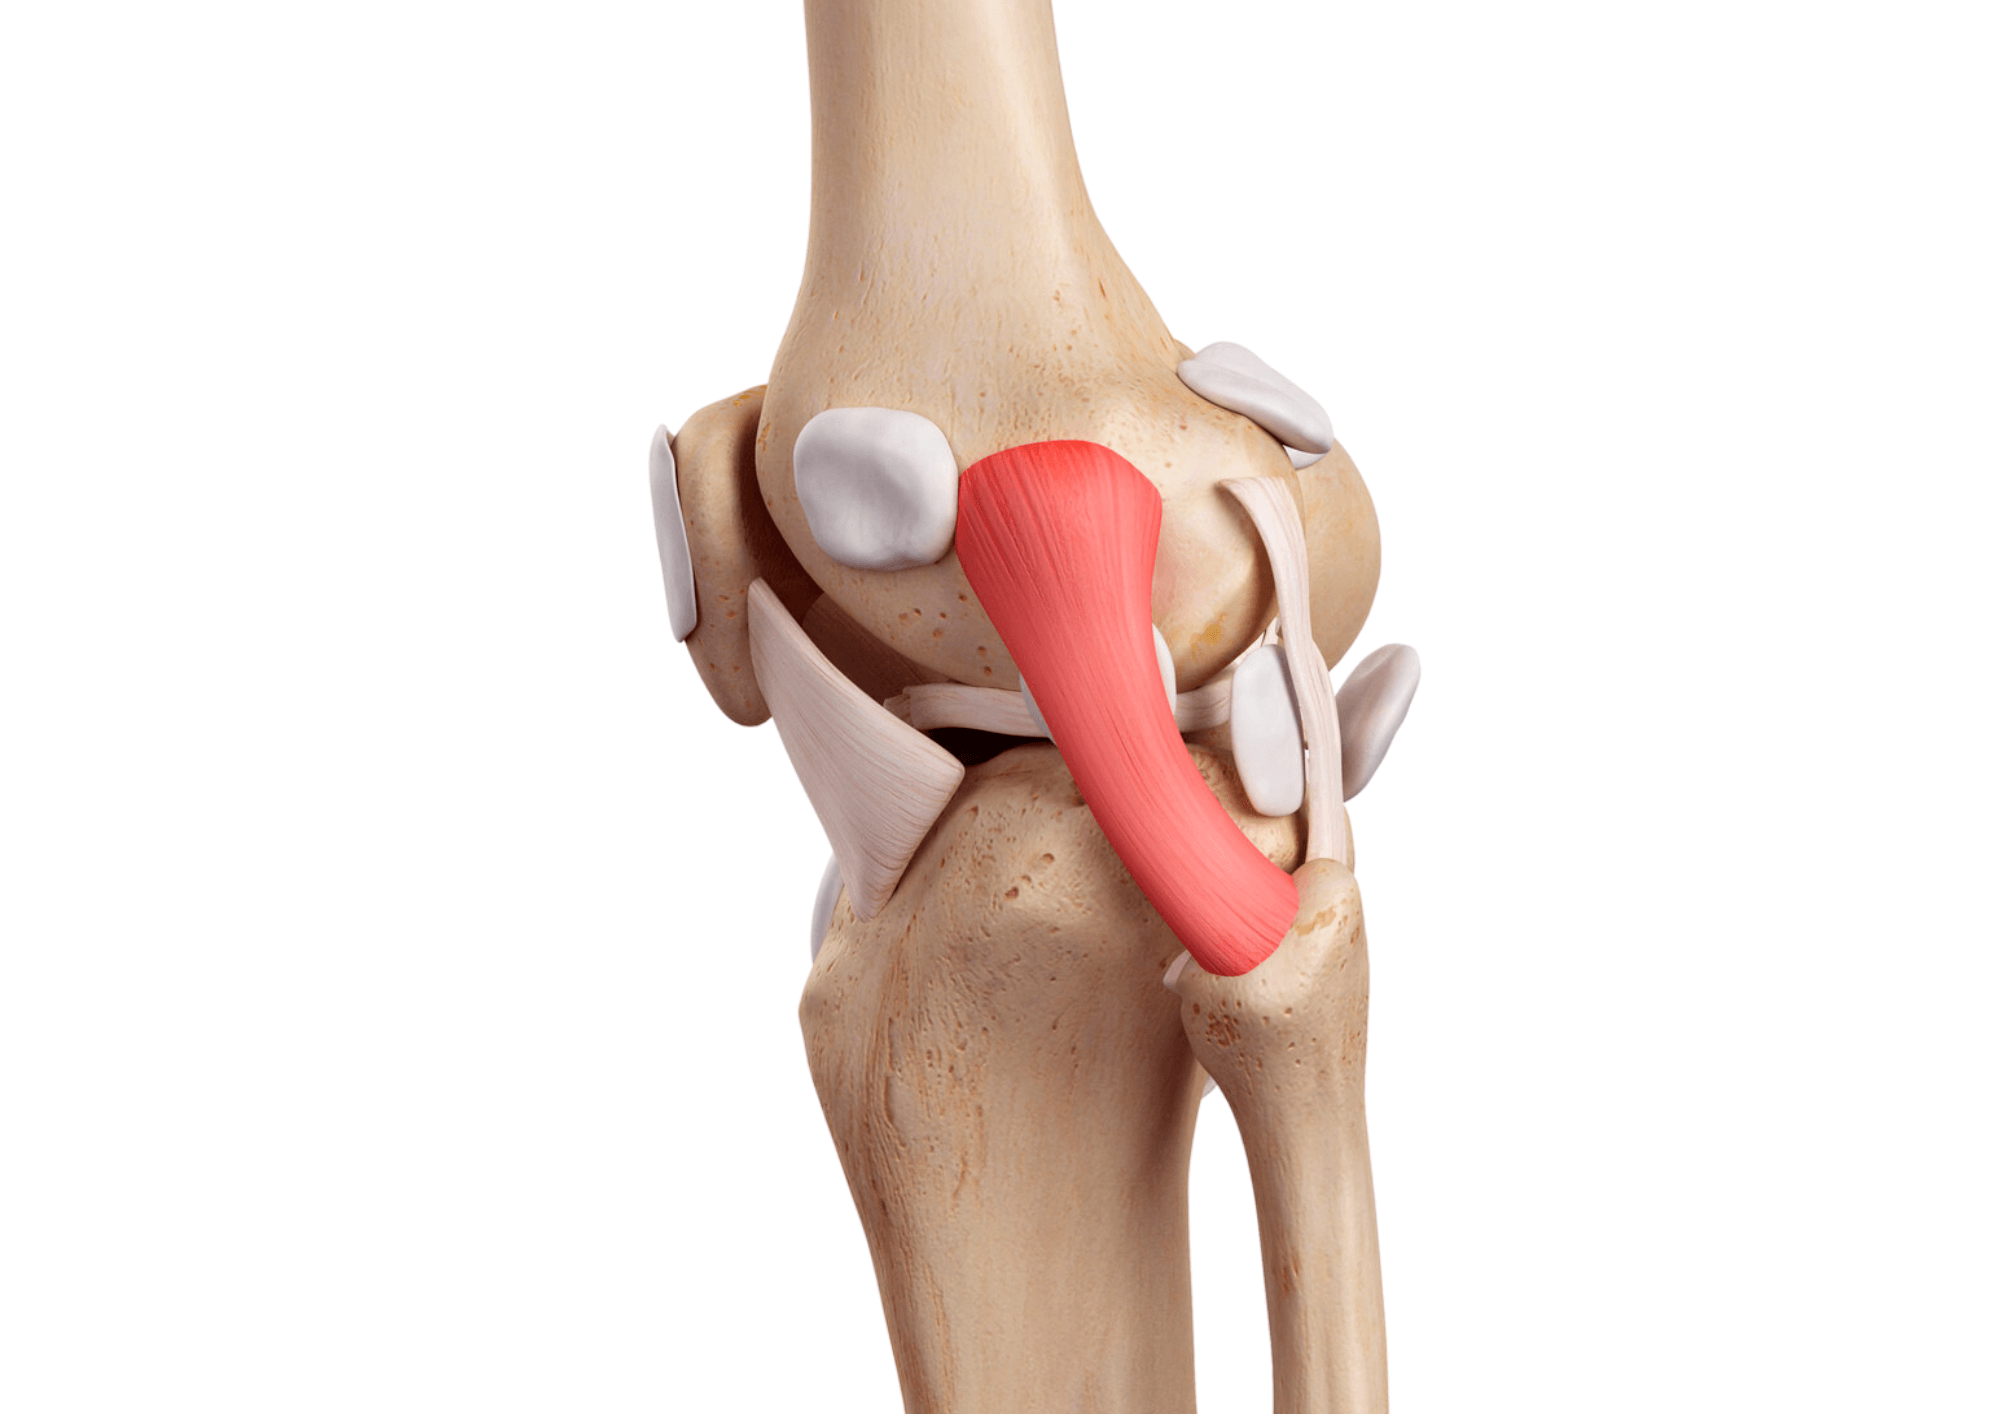 Image of a knee joint (anatomically).